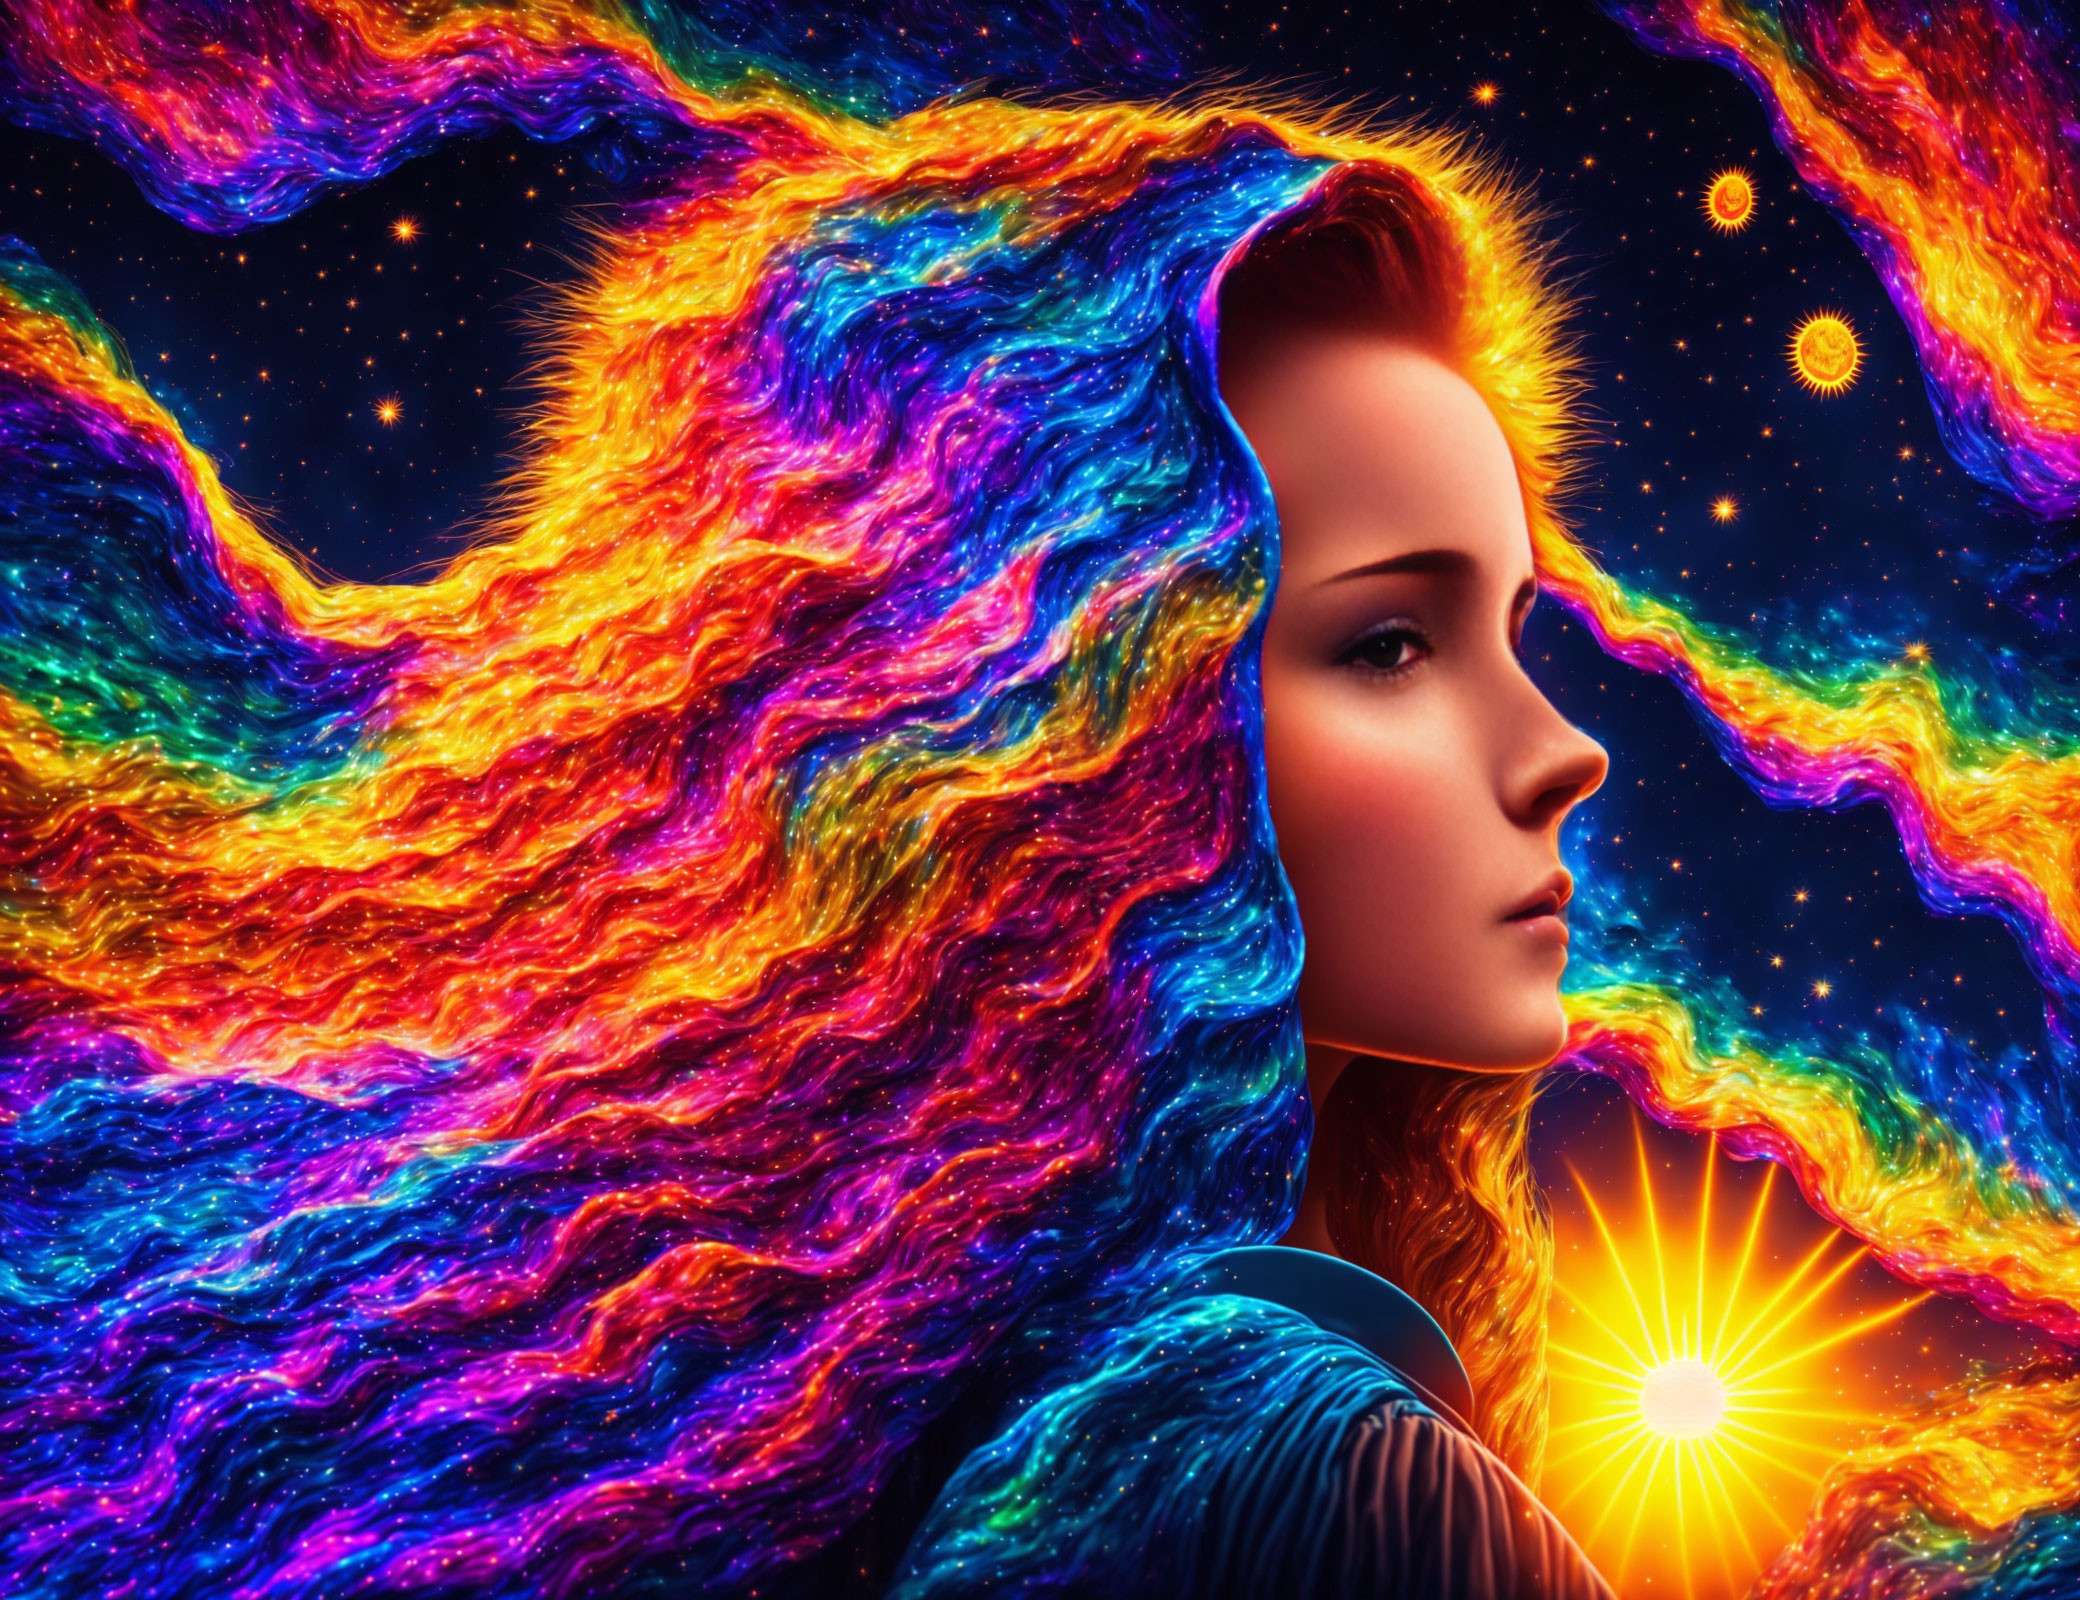 Colorful cosmic digital artwork of a woman blending into vibrant background